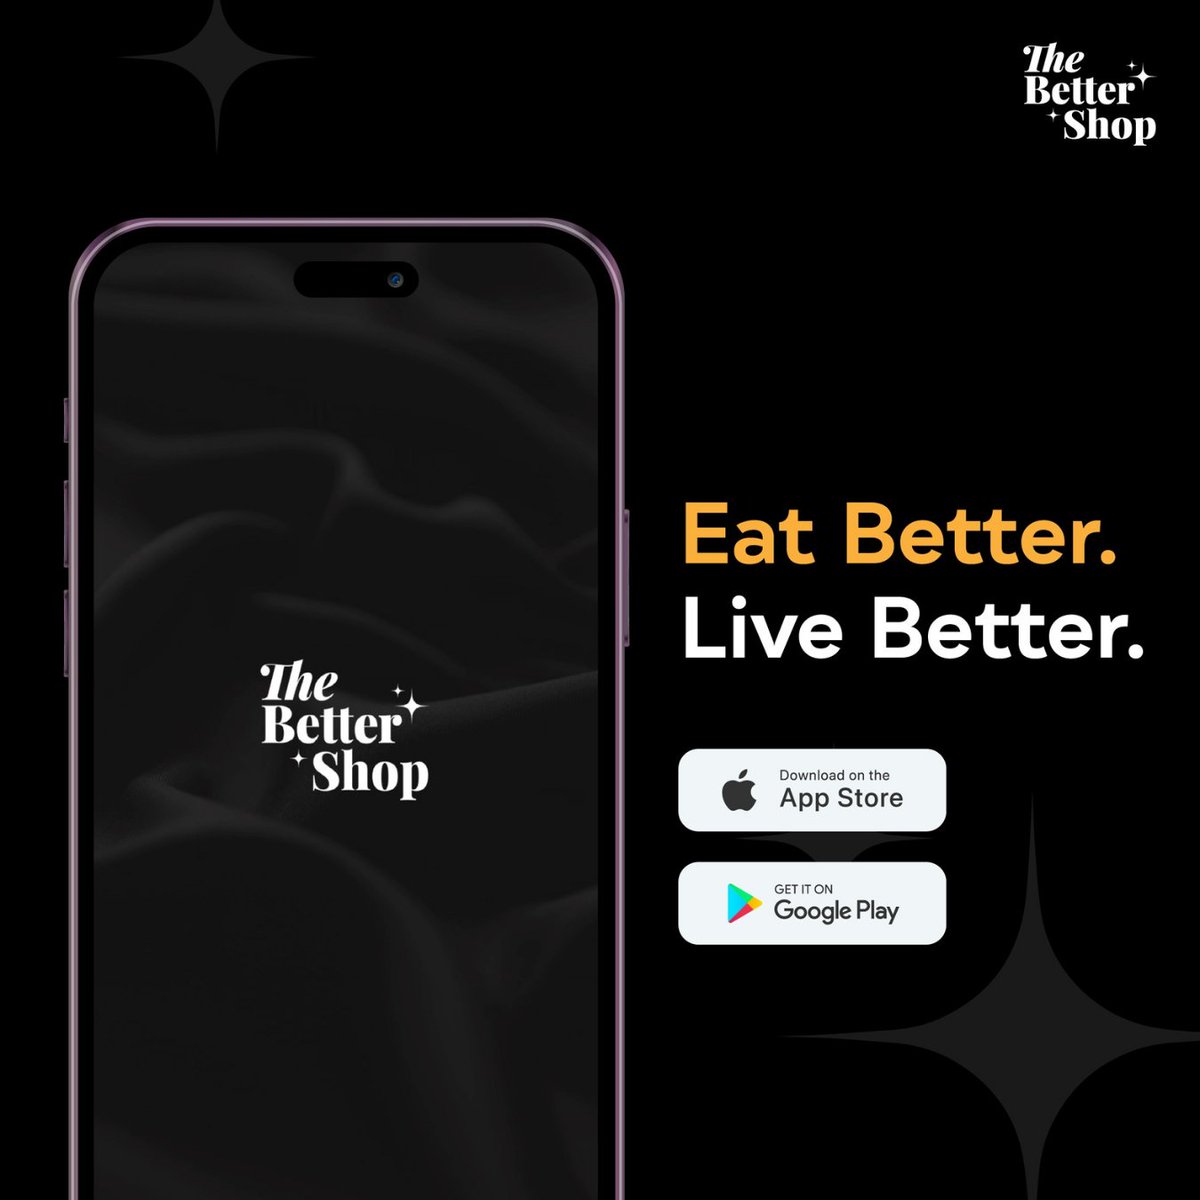 One App, Honest Brands & Healthier Living. That's what the #BetterShop is. Foods | Beverages | Groceries #NoMeansNo Eat Better. Live Better.✨ 📲 #GetTheApp #BetterShop #honestbrands #healthyliving #ZeroAdditives #ZeroPreservatives #cleanliving